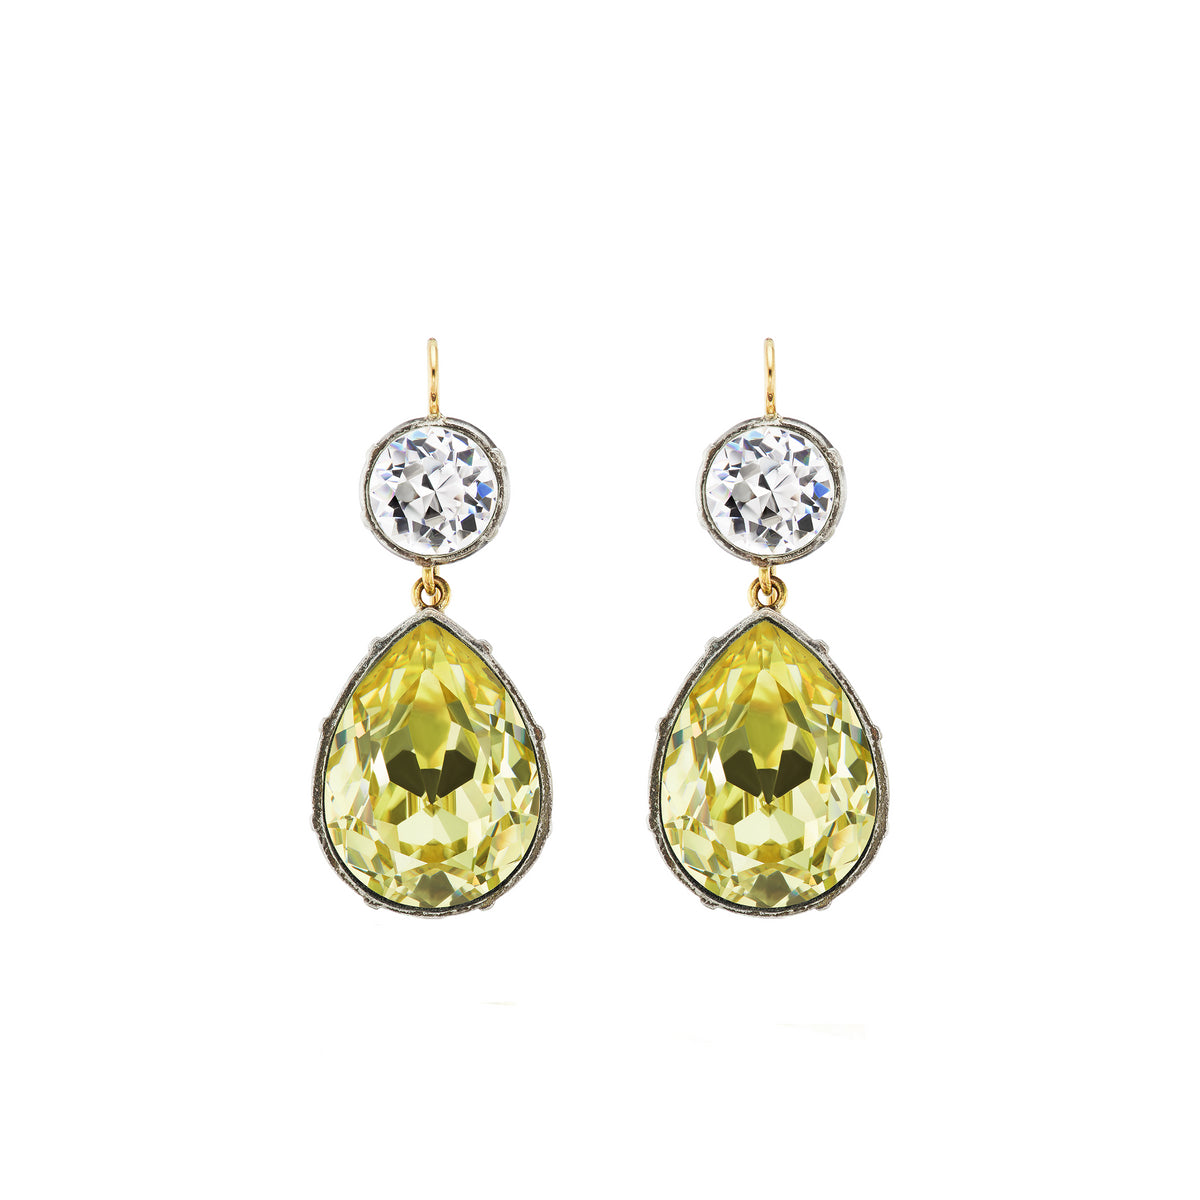 OTM Exclusive: Round and Pear Paste Drop Earrings